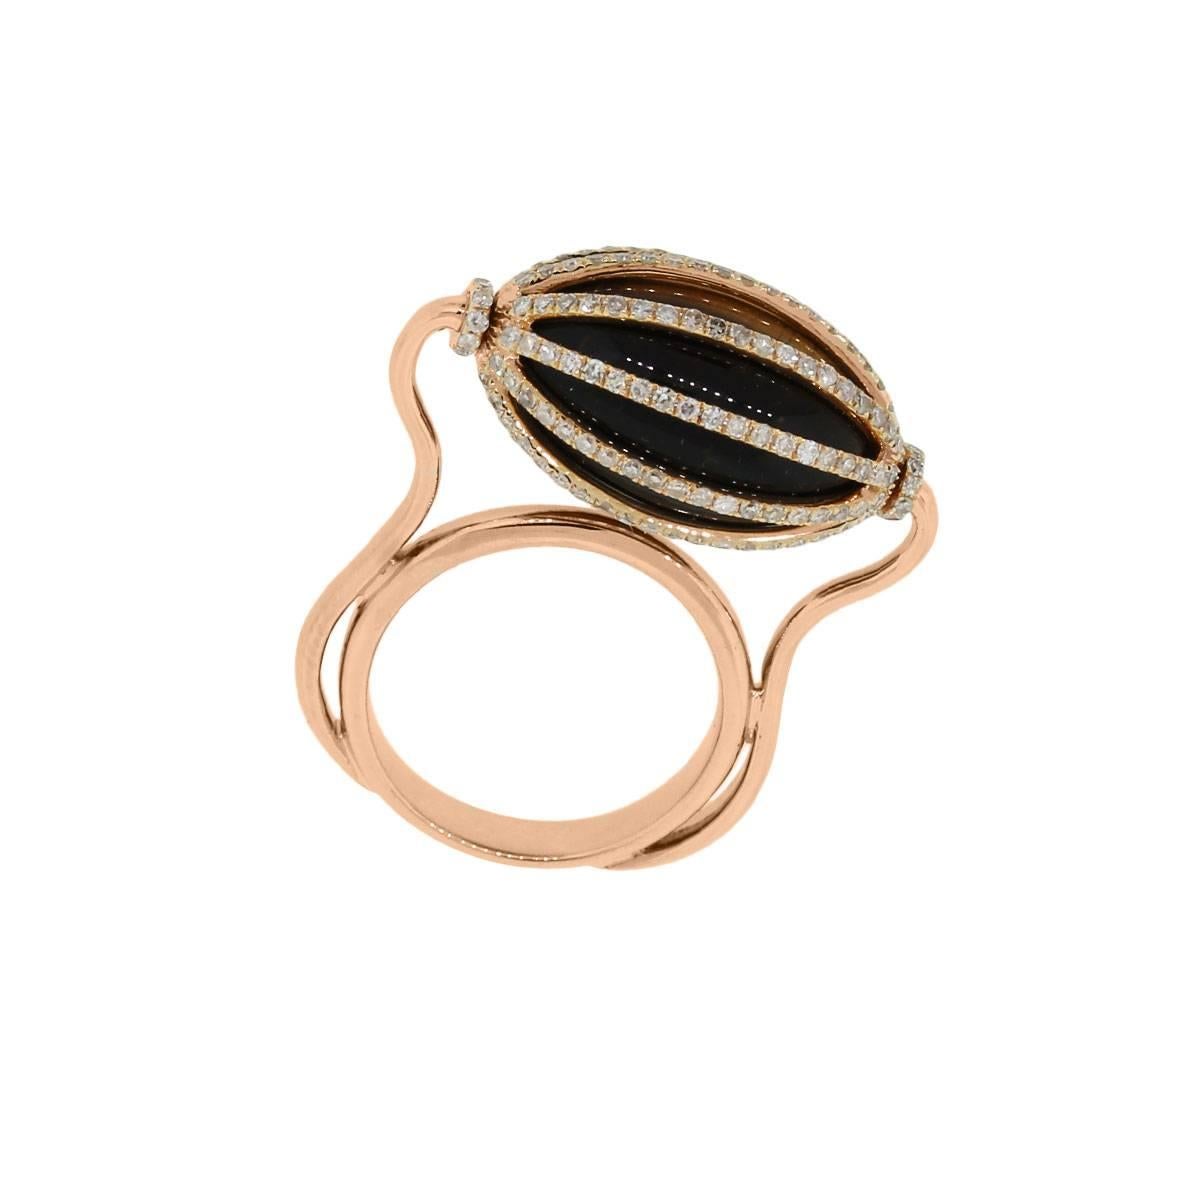 Material: 18k rose gold
Diamond Details: Approximately 1ctw round brilliant diamonds. Diamonds are G in color and VS in clarity
Gemstone Details: Tiger’s eye
Ring Measurements: 1.31″ x 0.51″ x 1.06″
Ring Size: 6
Total Weight: 11.3g